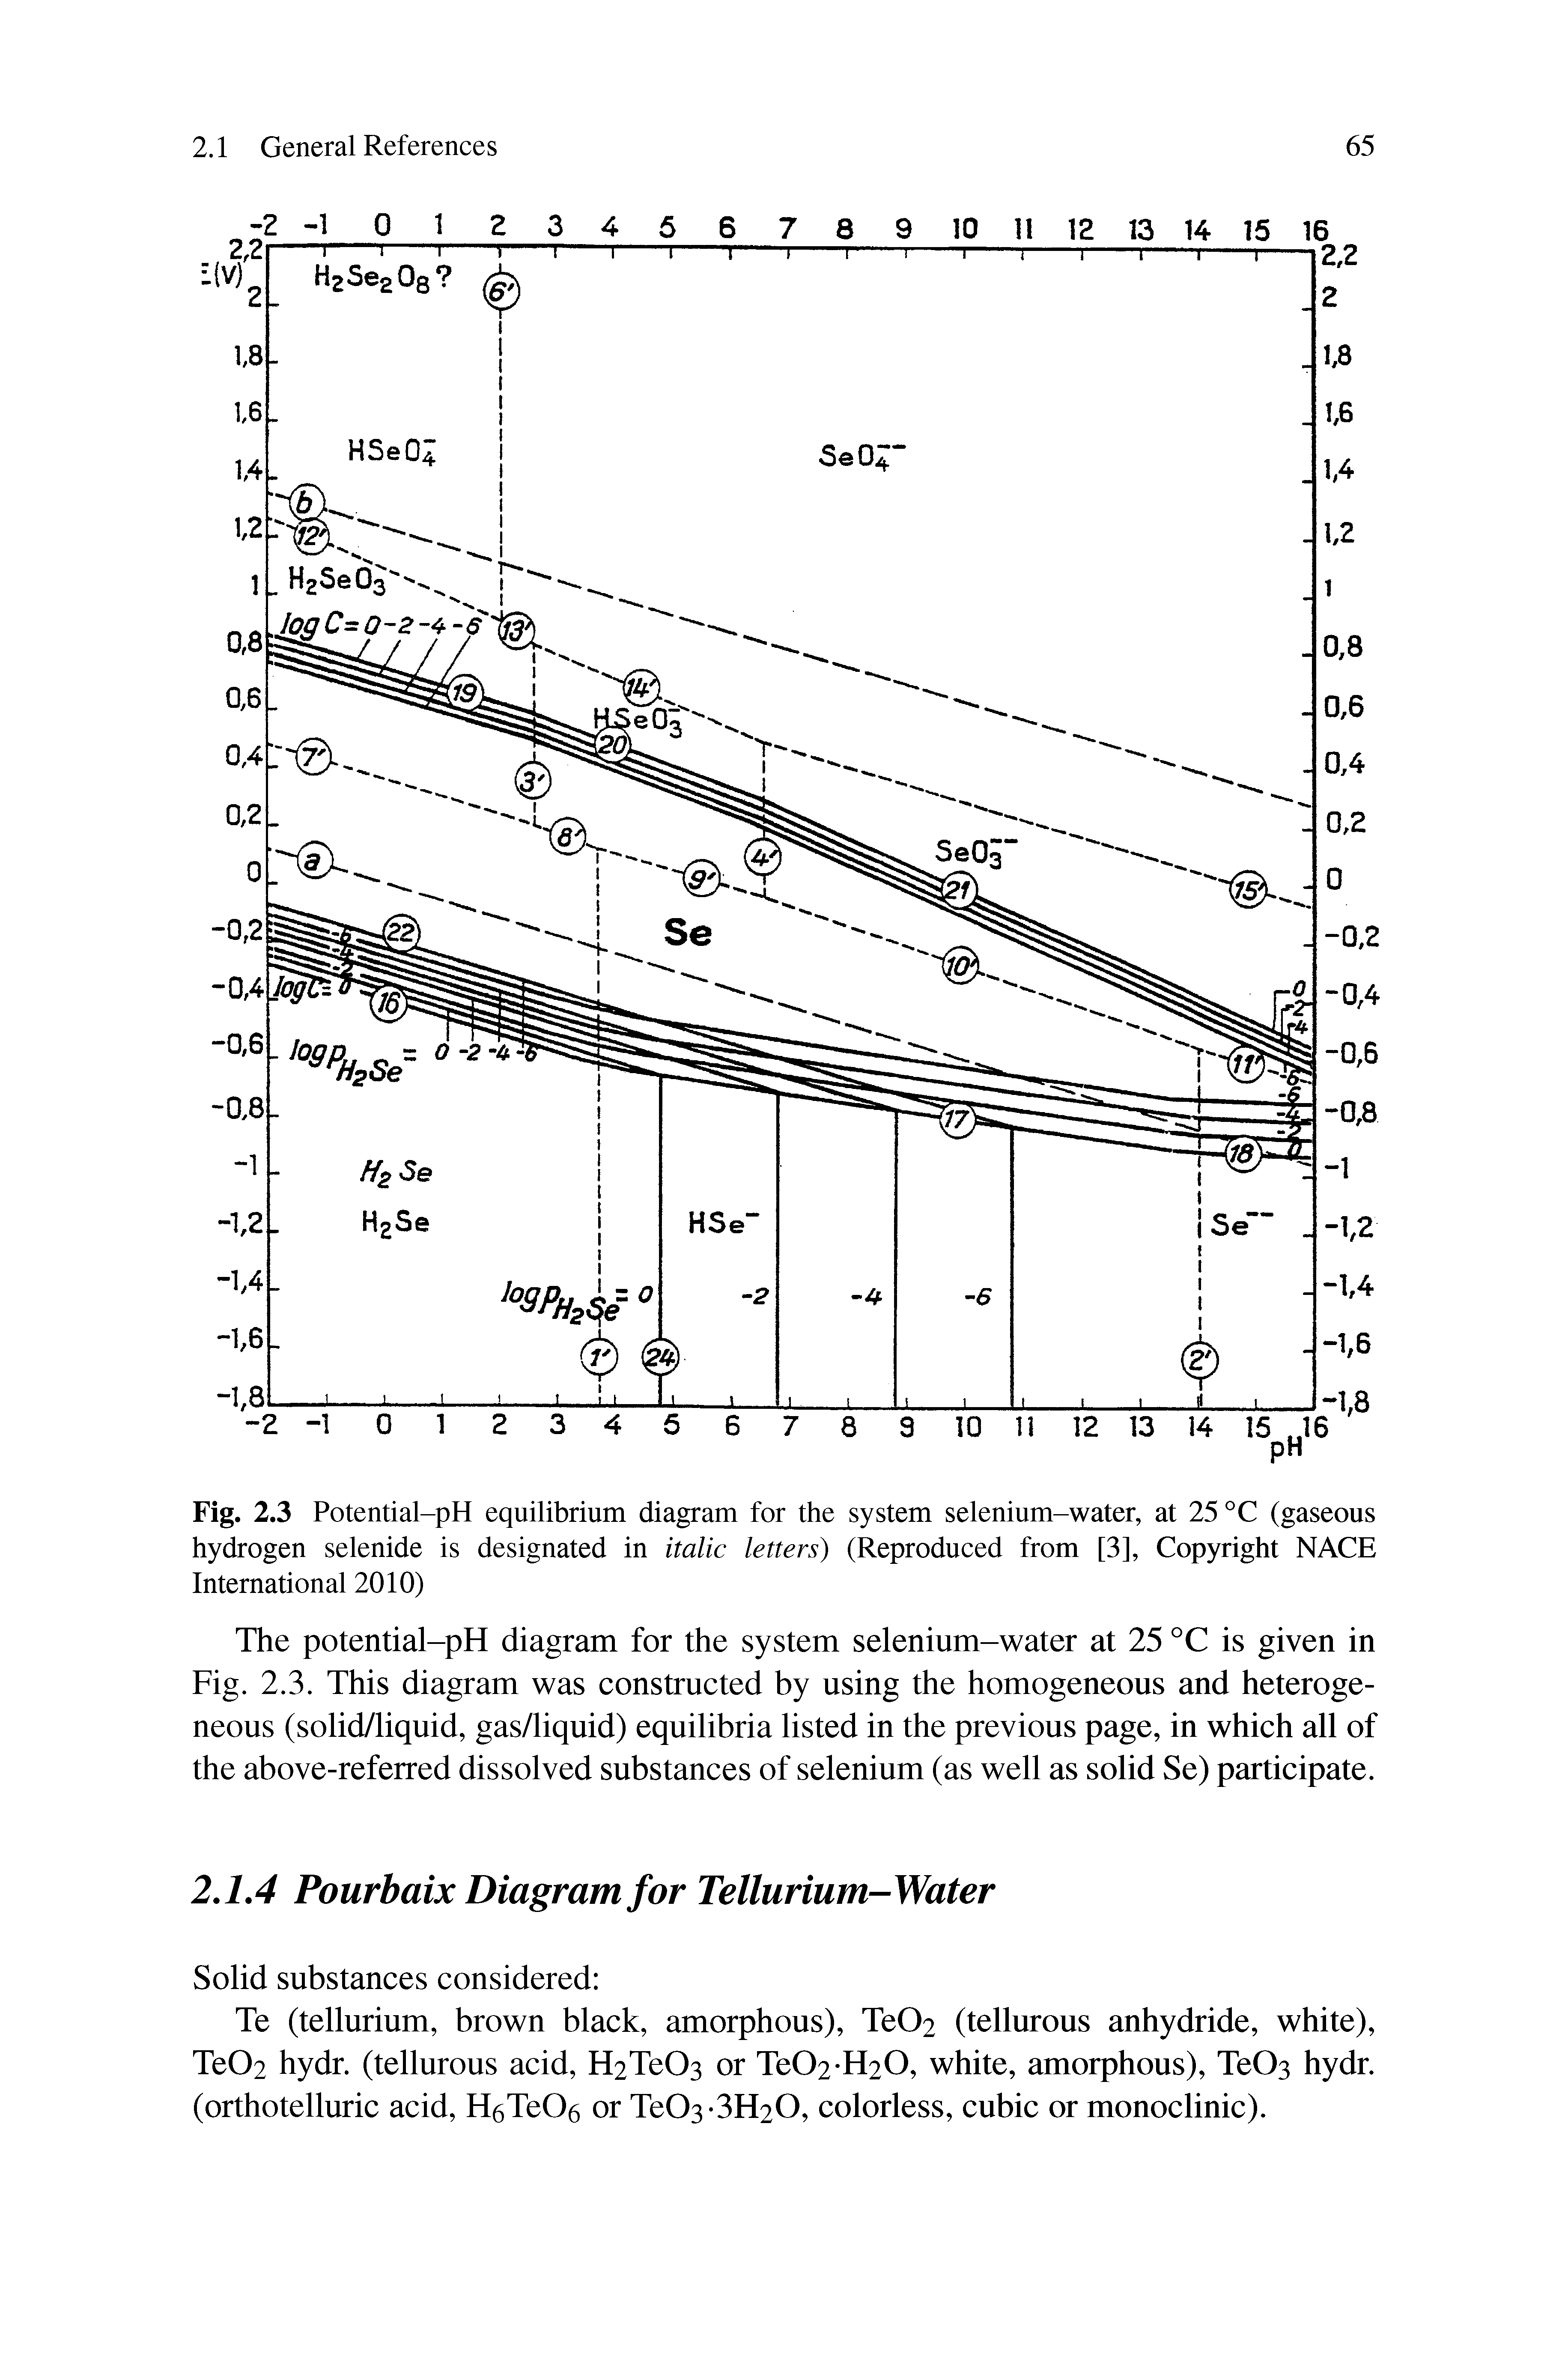 Fig. 2.3 Potential-pH equilibrium diagram for the system selenium-water, at 25 °C (gaseous hydrogen selenide is designated in italic letters) (Reproduced from [3], Copyright NACE International 2010)...